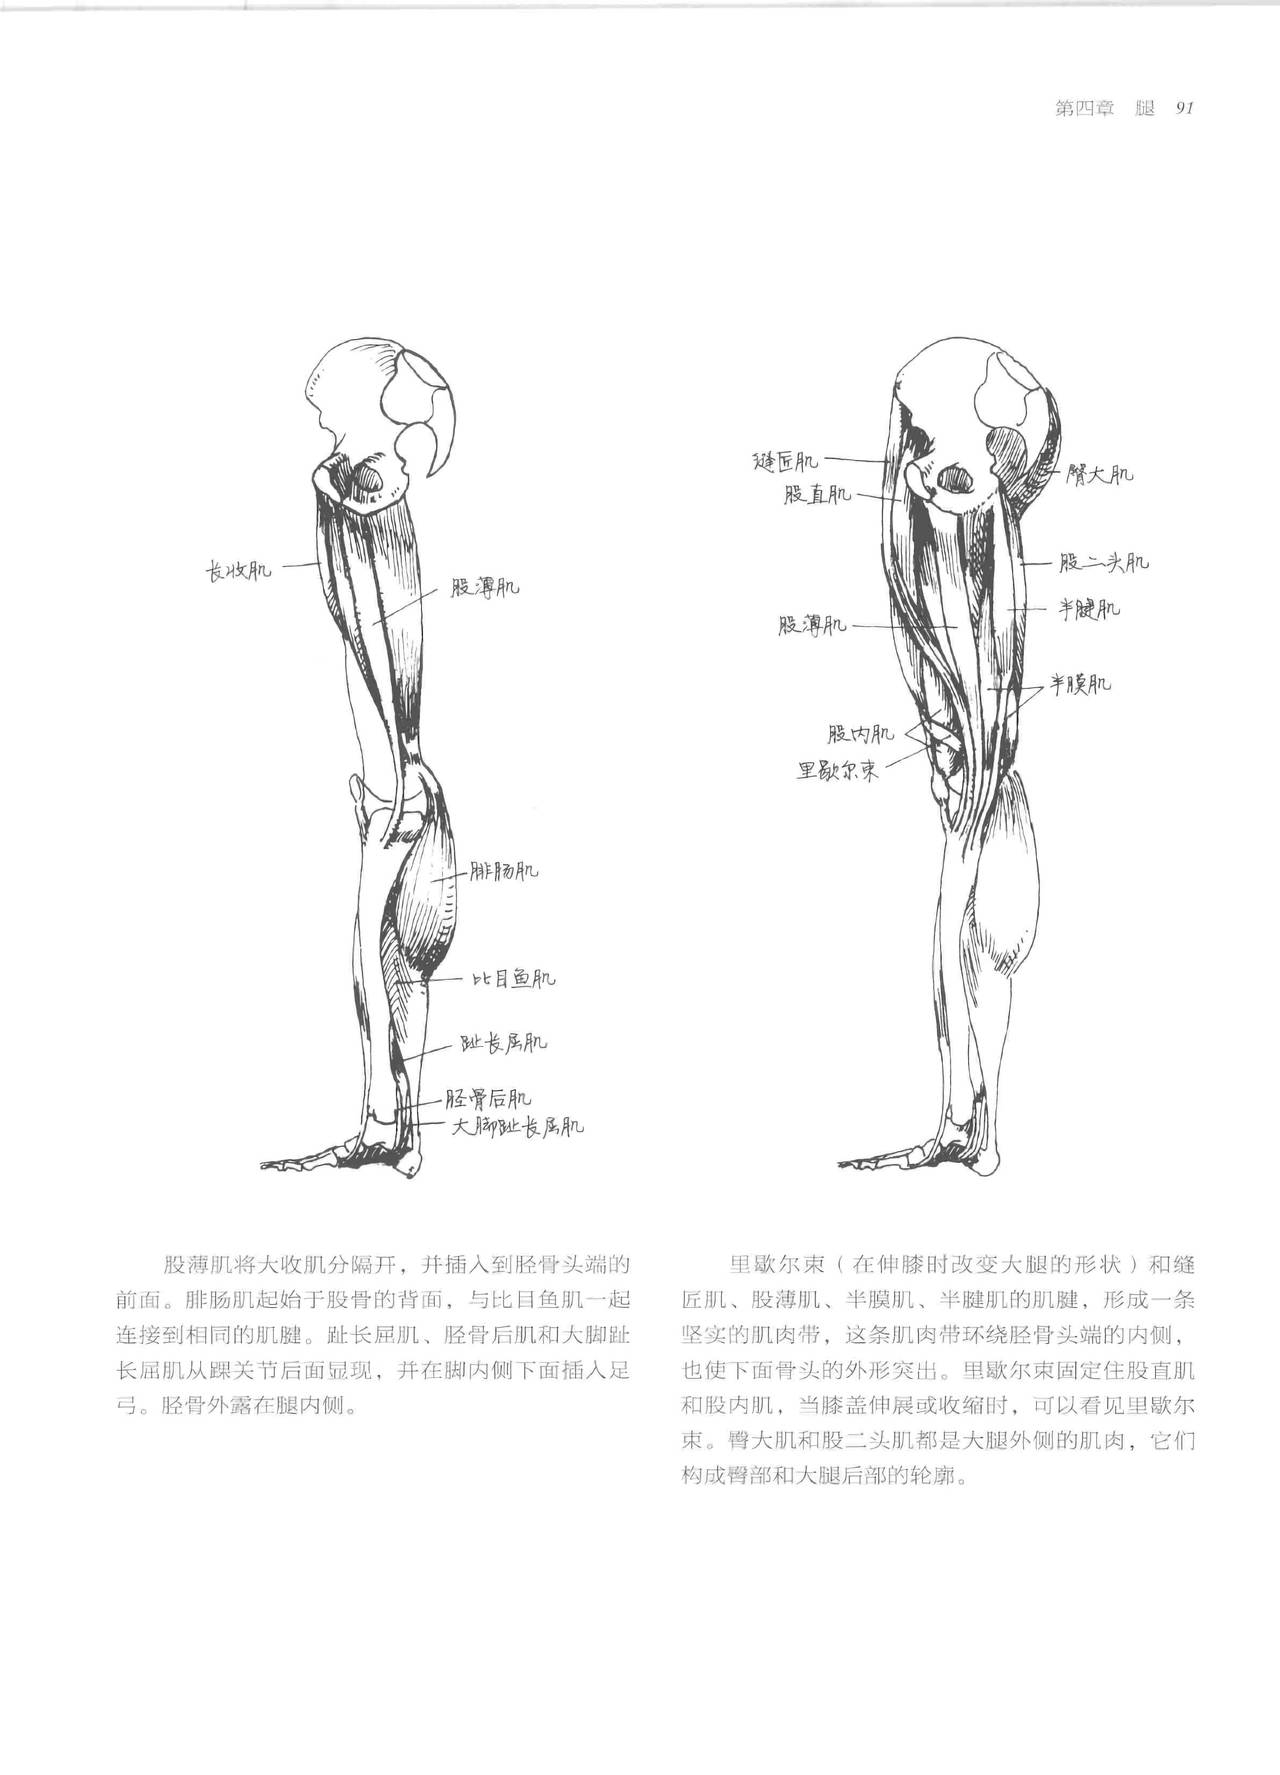 Anatomy-A Complete Guide for Artists - Joseph Sheppard [Chinese] 91